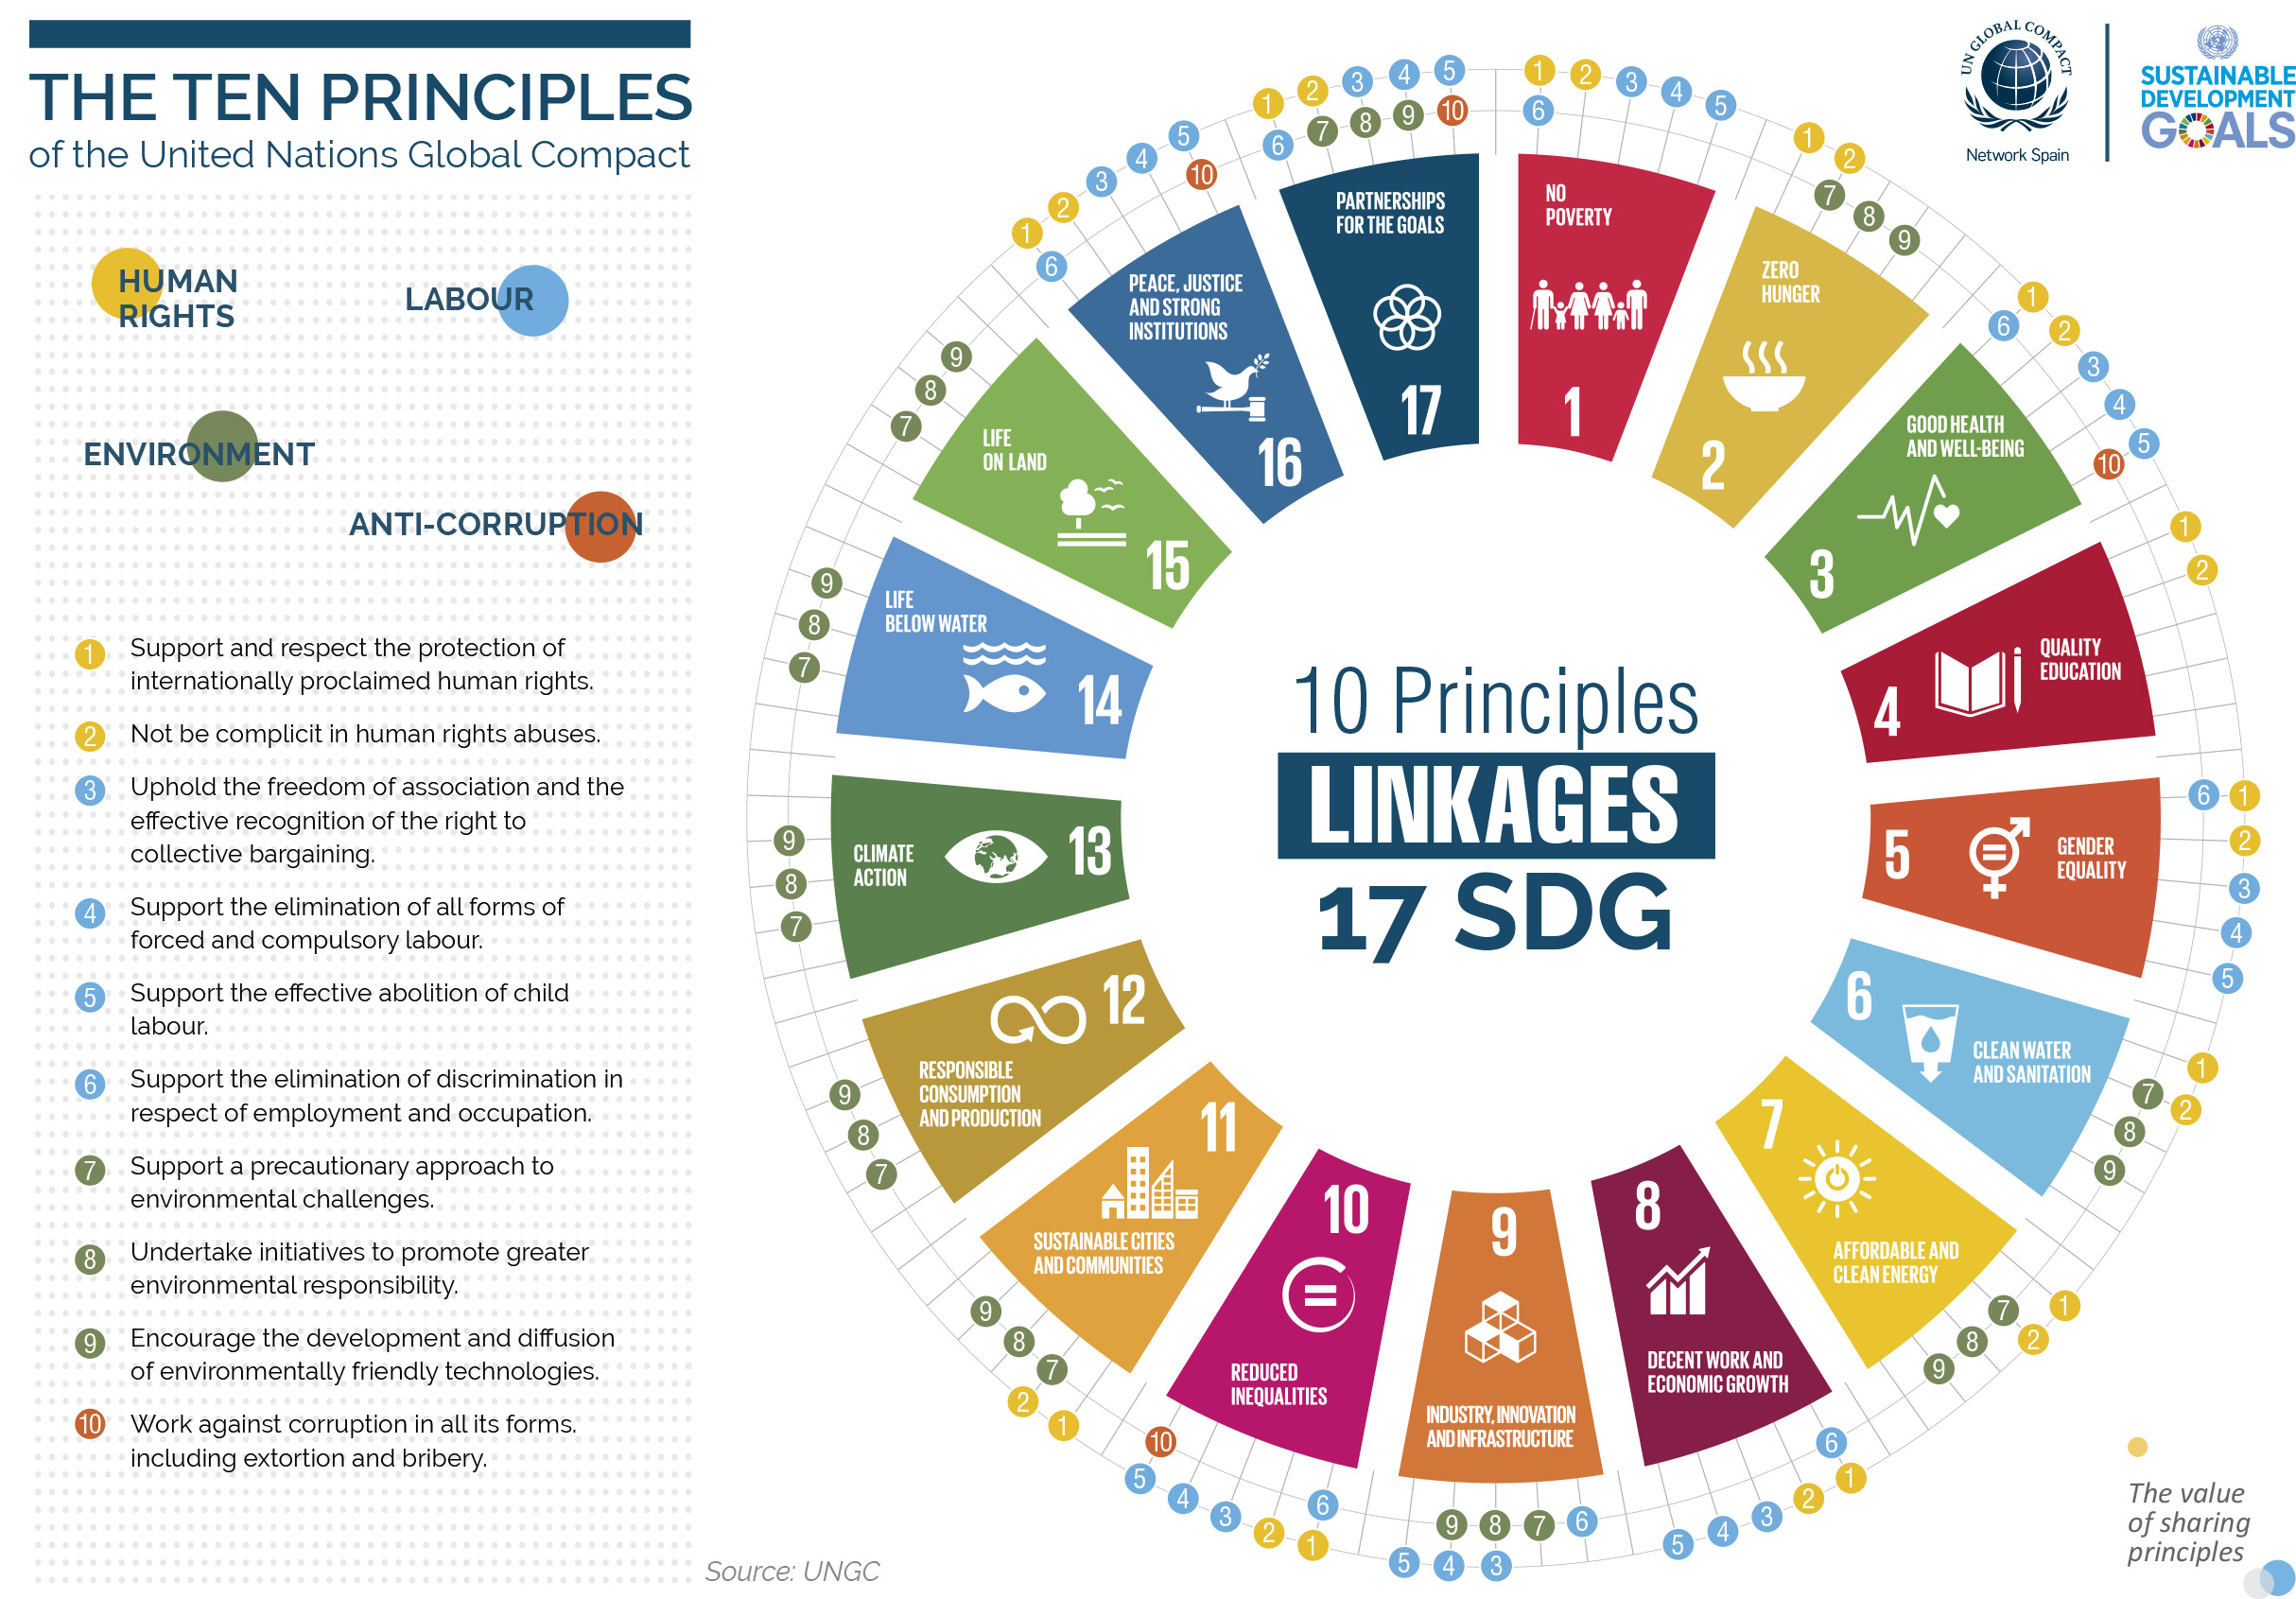 The ten principles of the UN Global Compact, related to the Sustainable Development Goals (SDGs) of Agenda 2030.